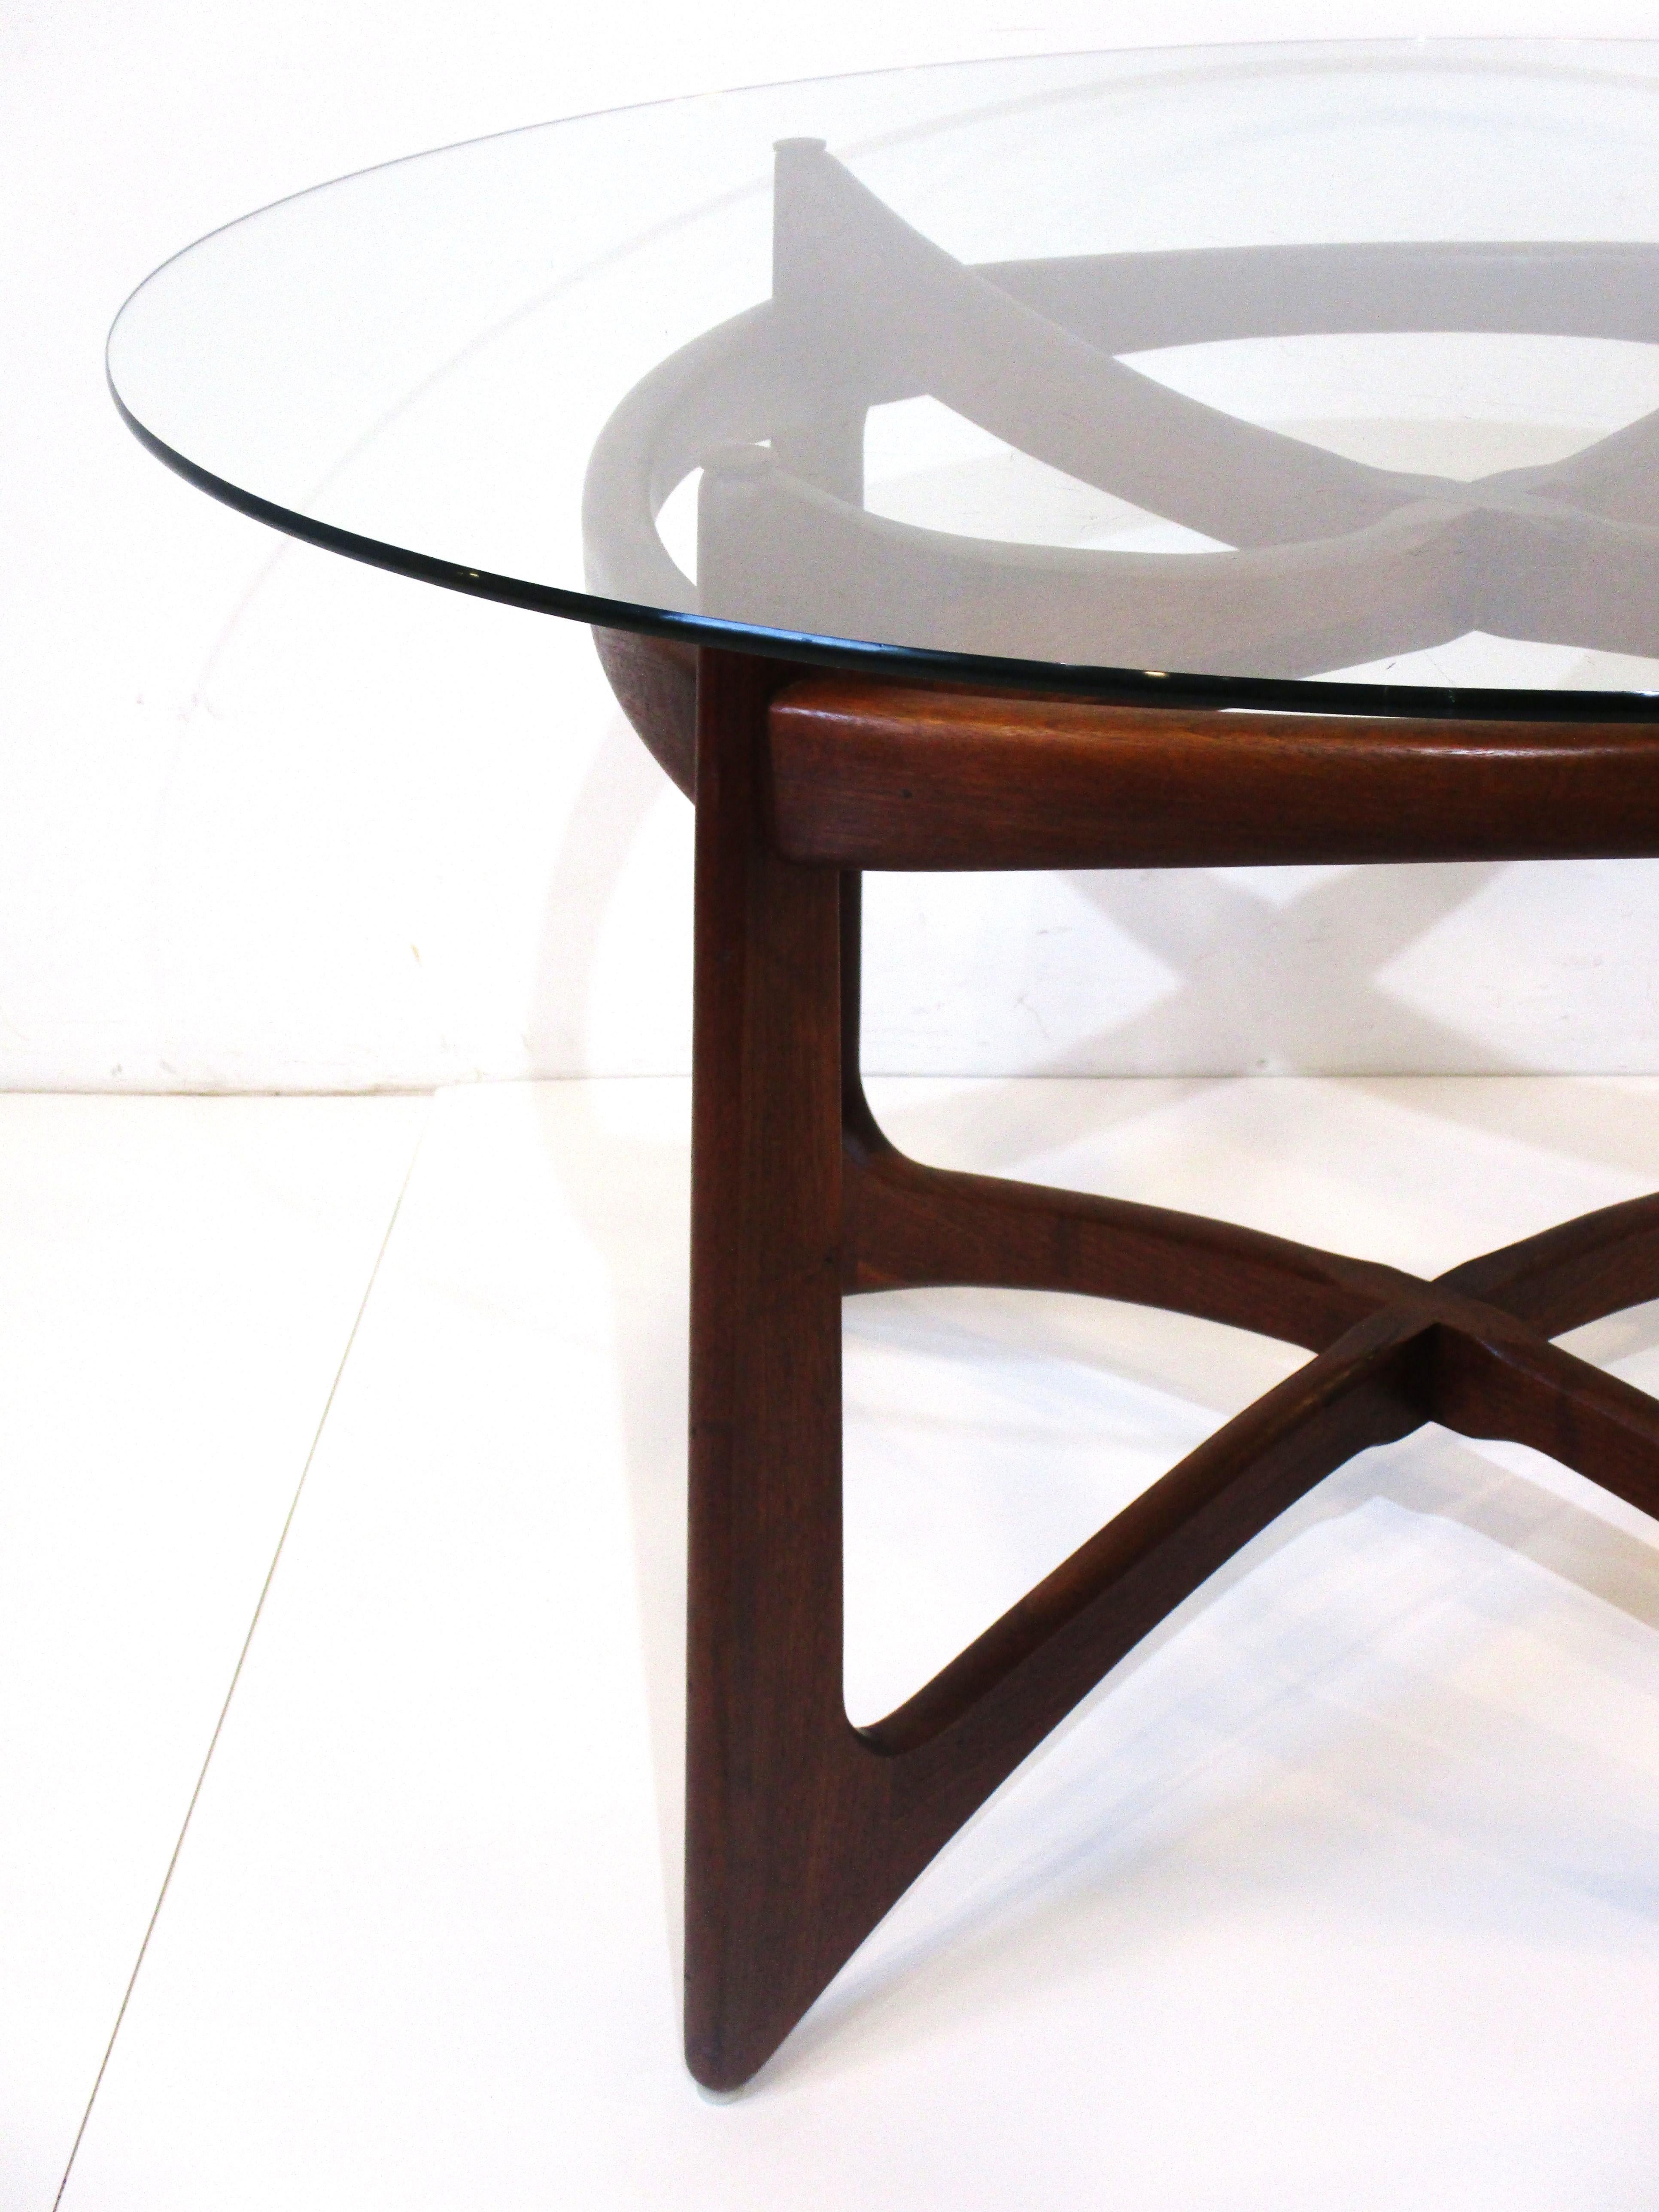 American Midcentury Adrian Pearsall Sculptural Walnut Dining Table 